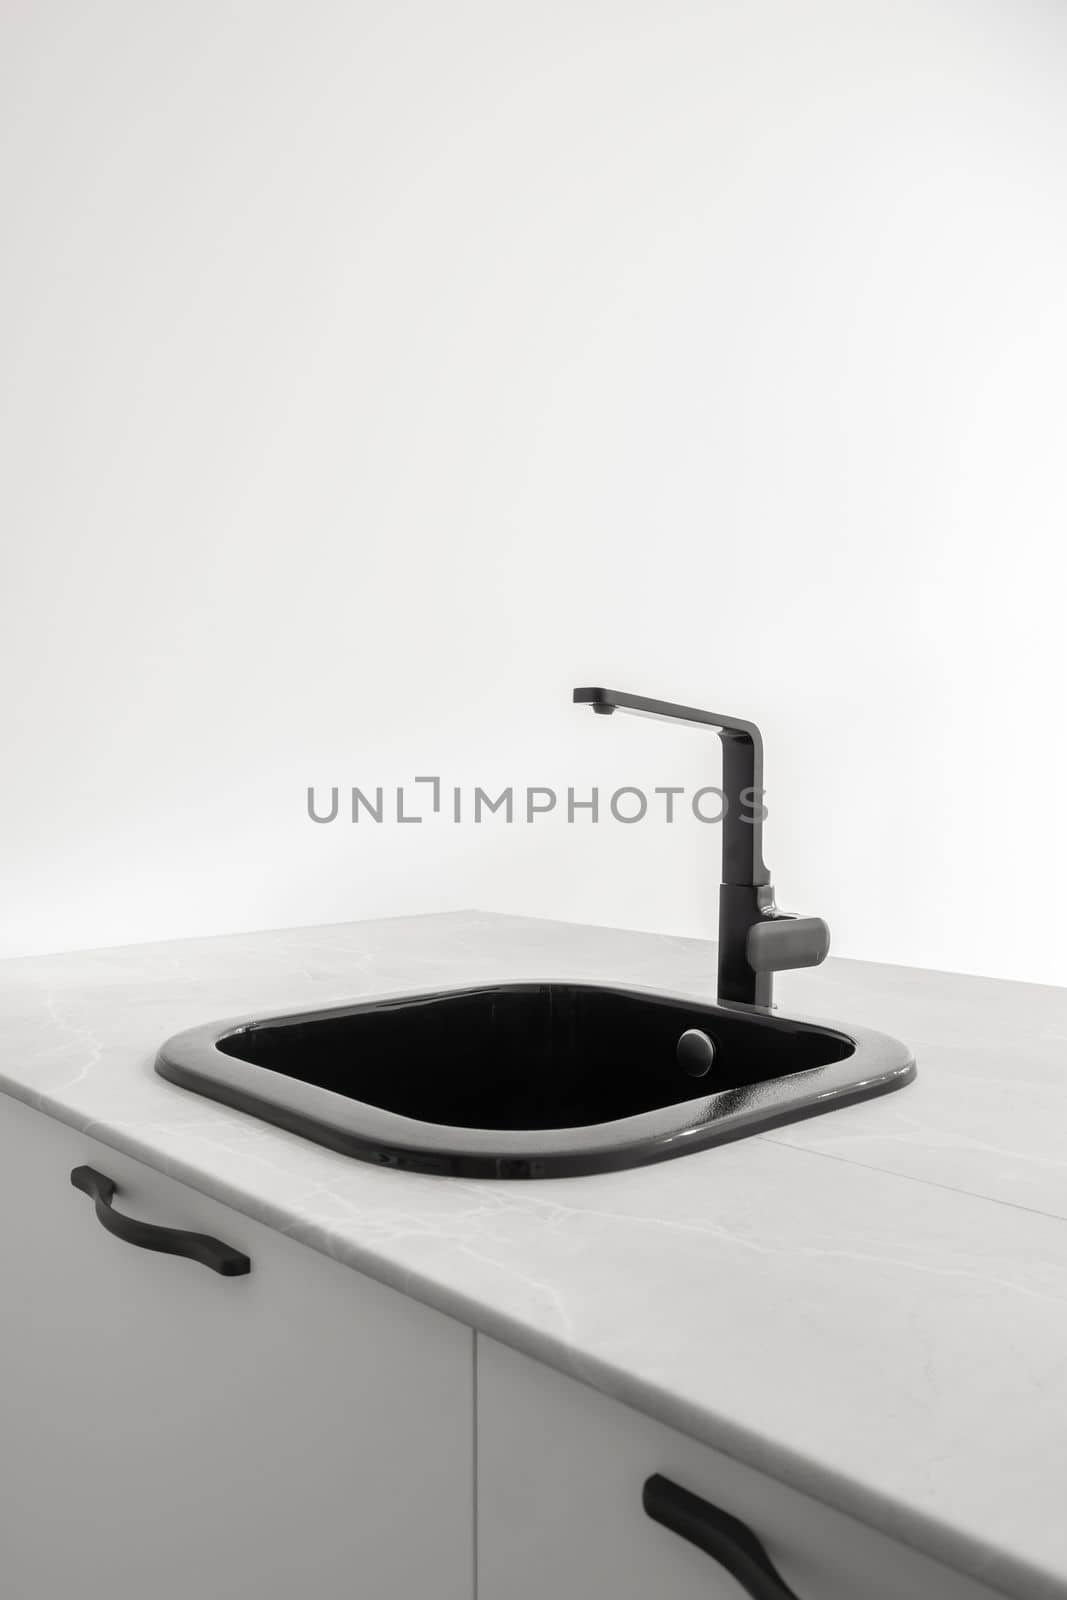 Stylish black kitchen sink in a white table on the white walls of the kitchen. Concept of high-tech modern plumbing and kitchen design. Comfort and design by apavlin